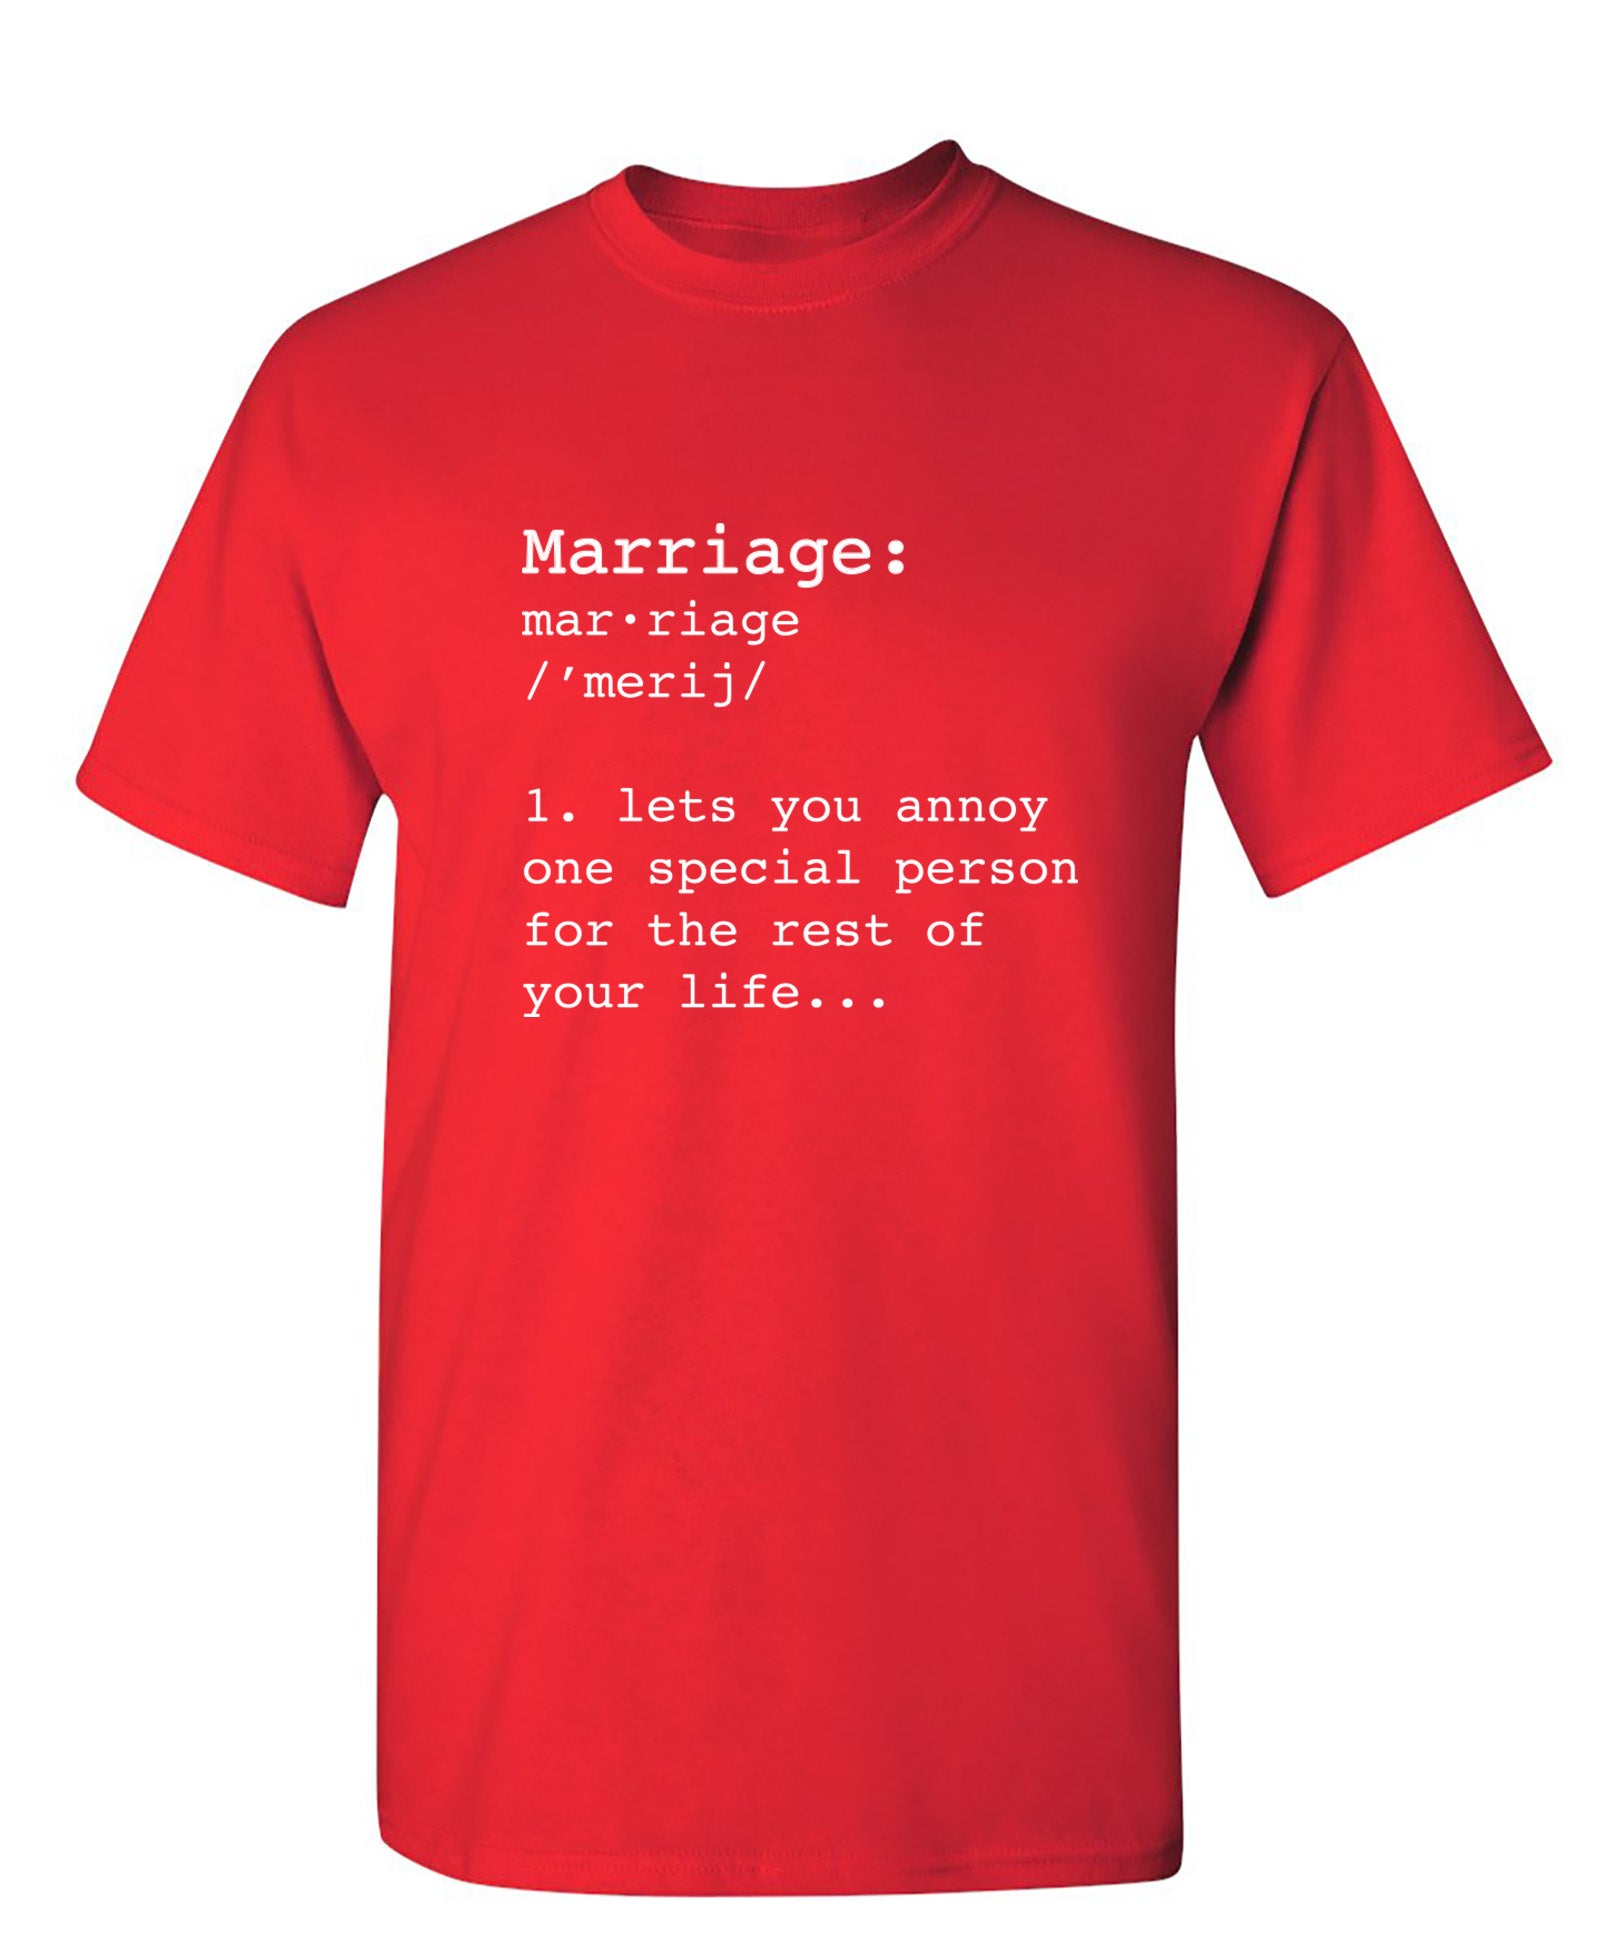 Marriage: One Special Person For The Rest Of Your Life - Funny T Shirts & Graphic Tees